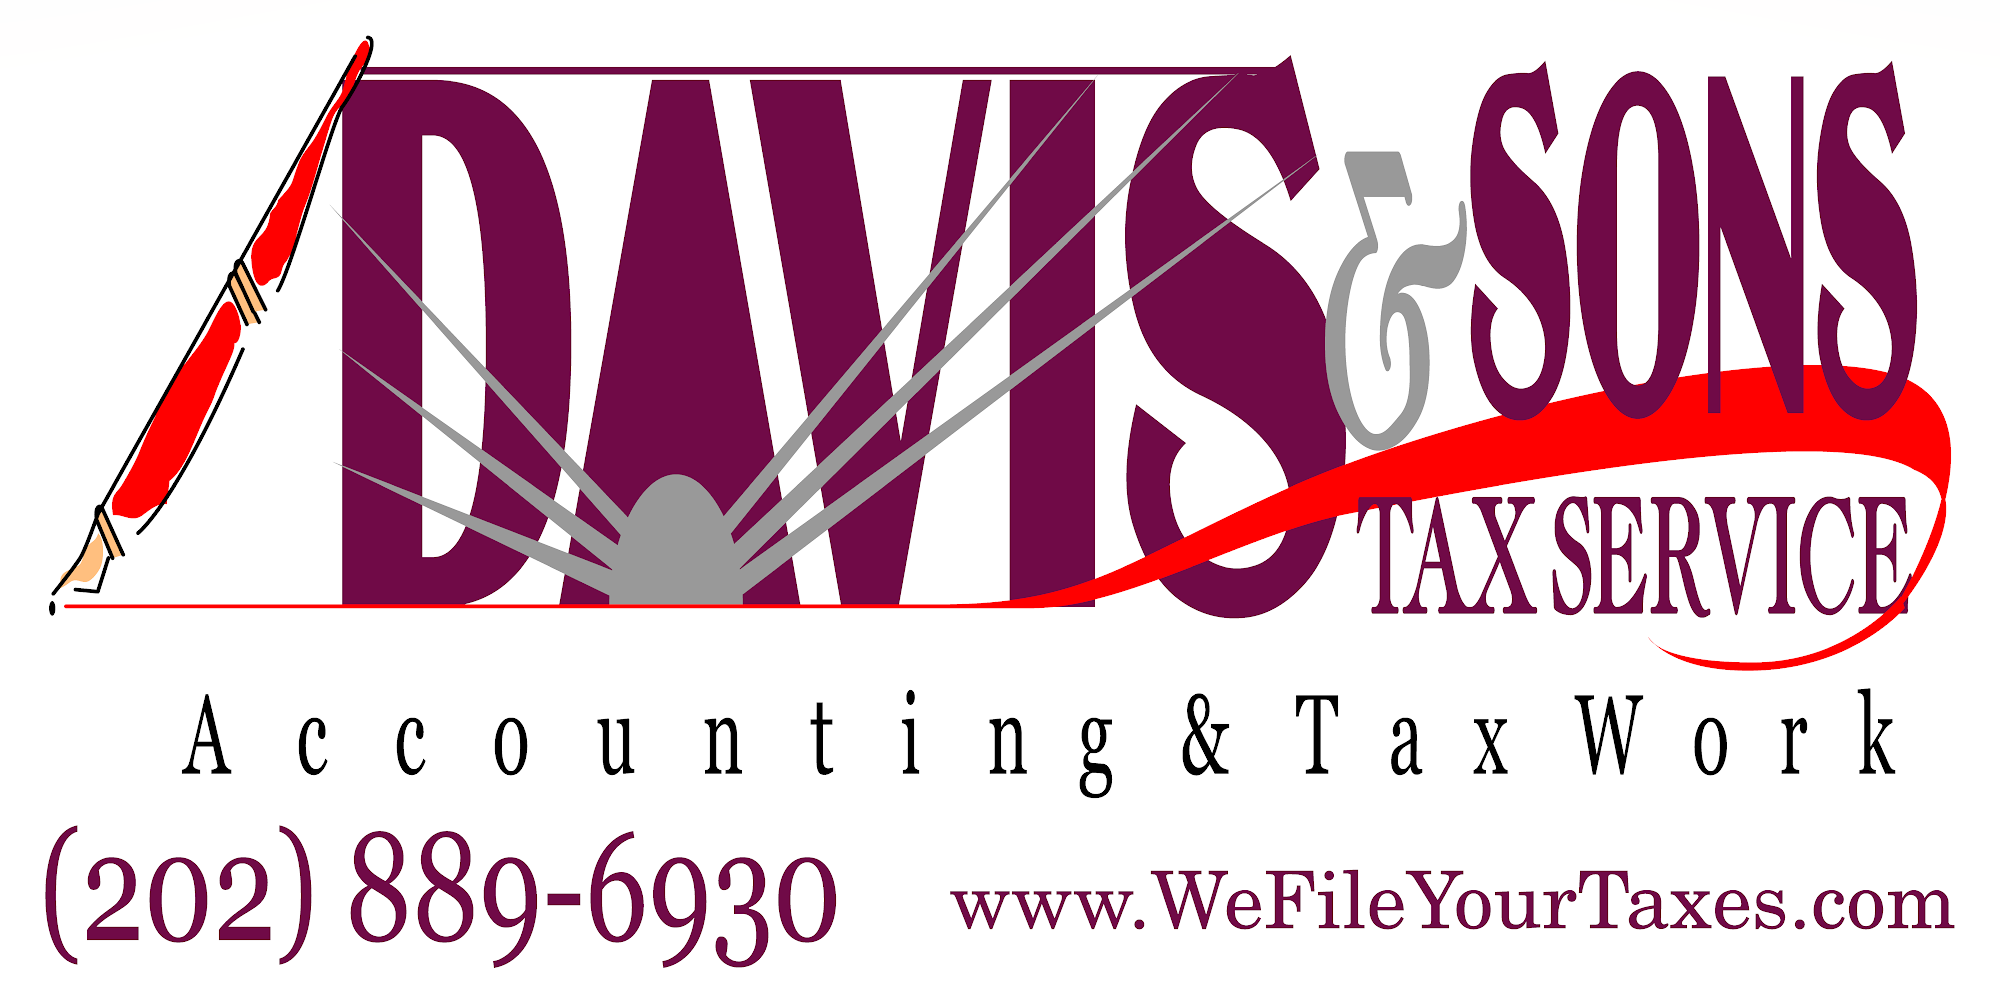 Davis and Sons Tax Service